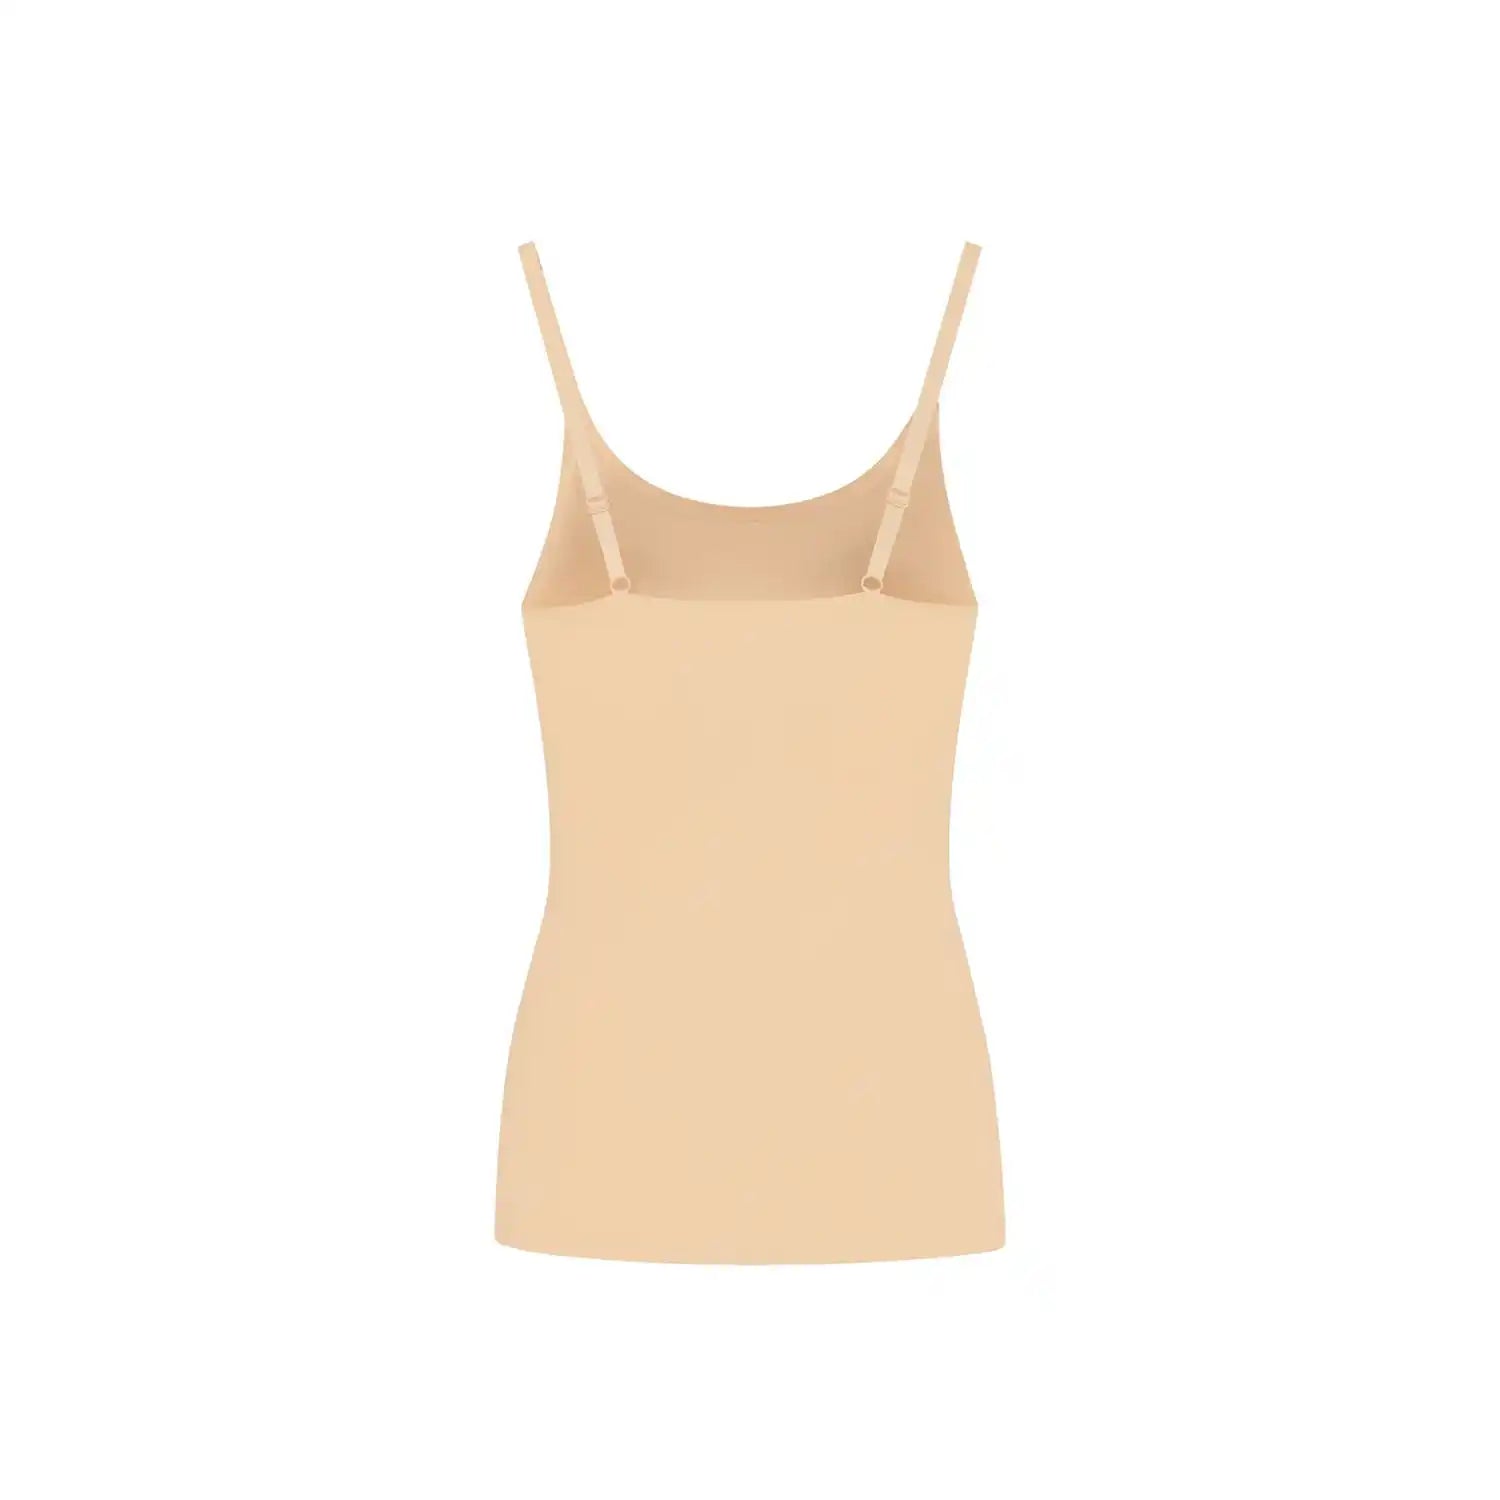 Bye Bra Invisible Singlet - Beige 2 Shaws Department Stores